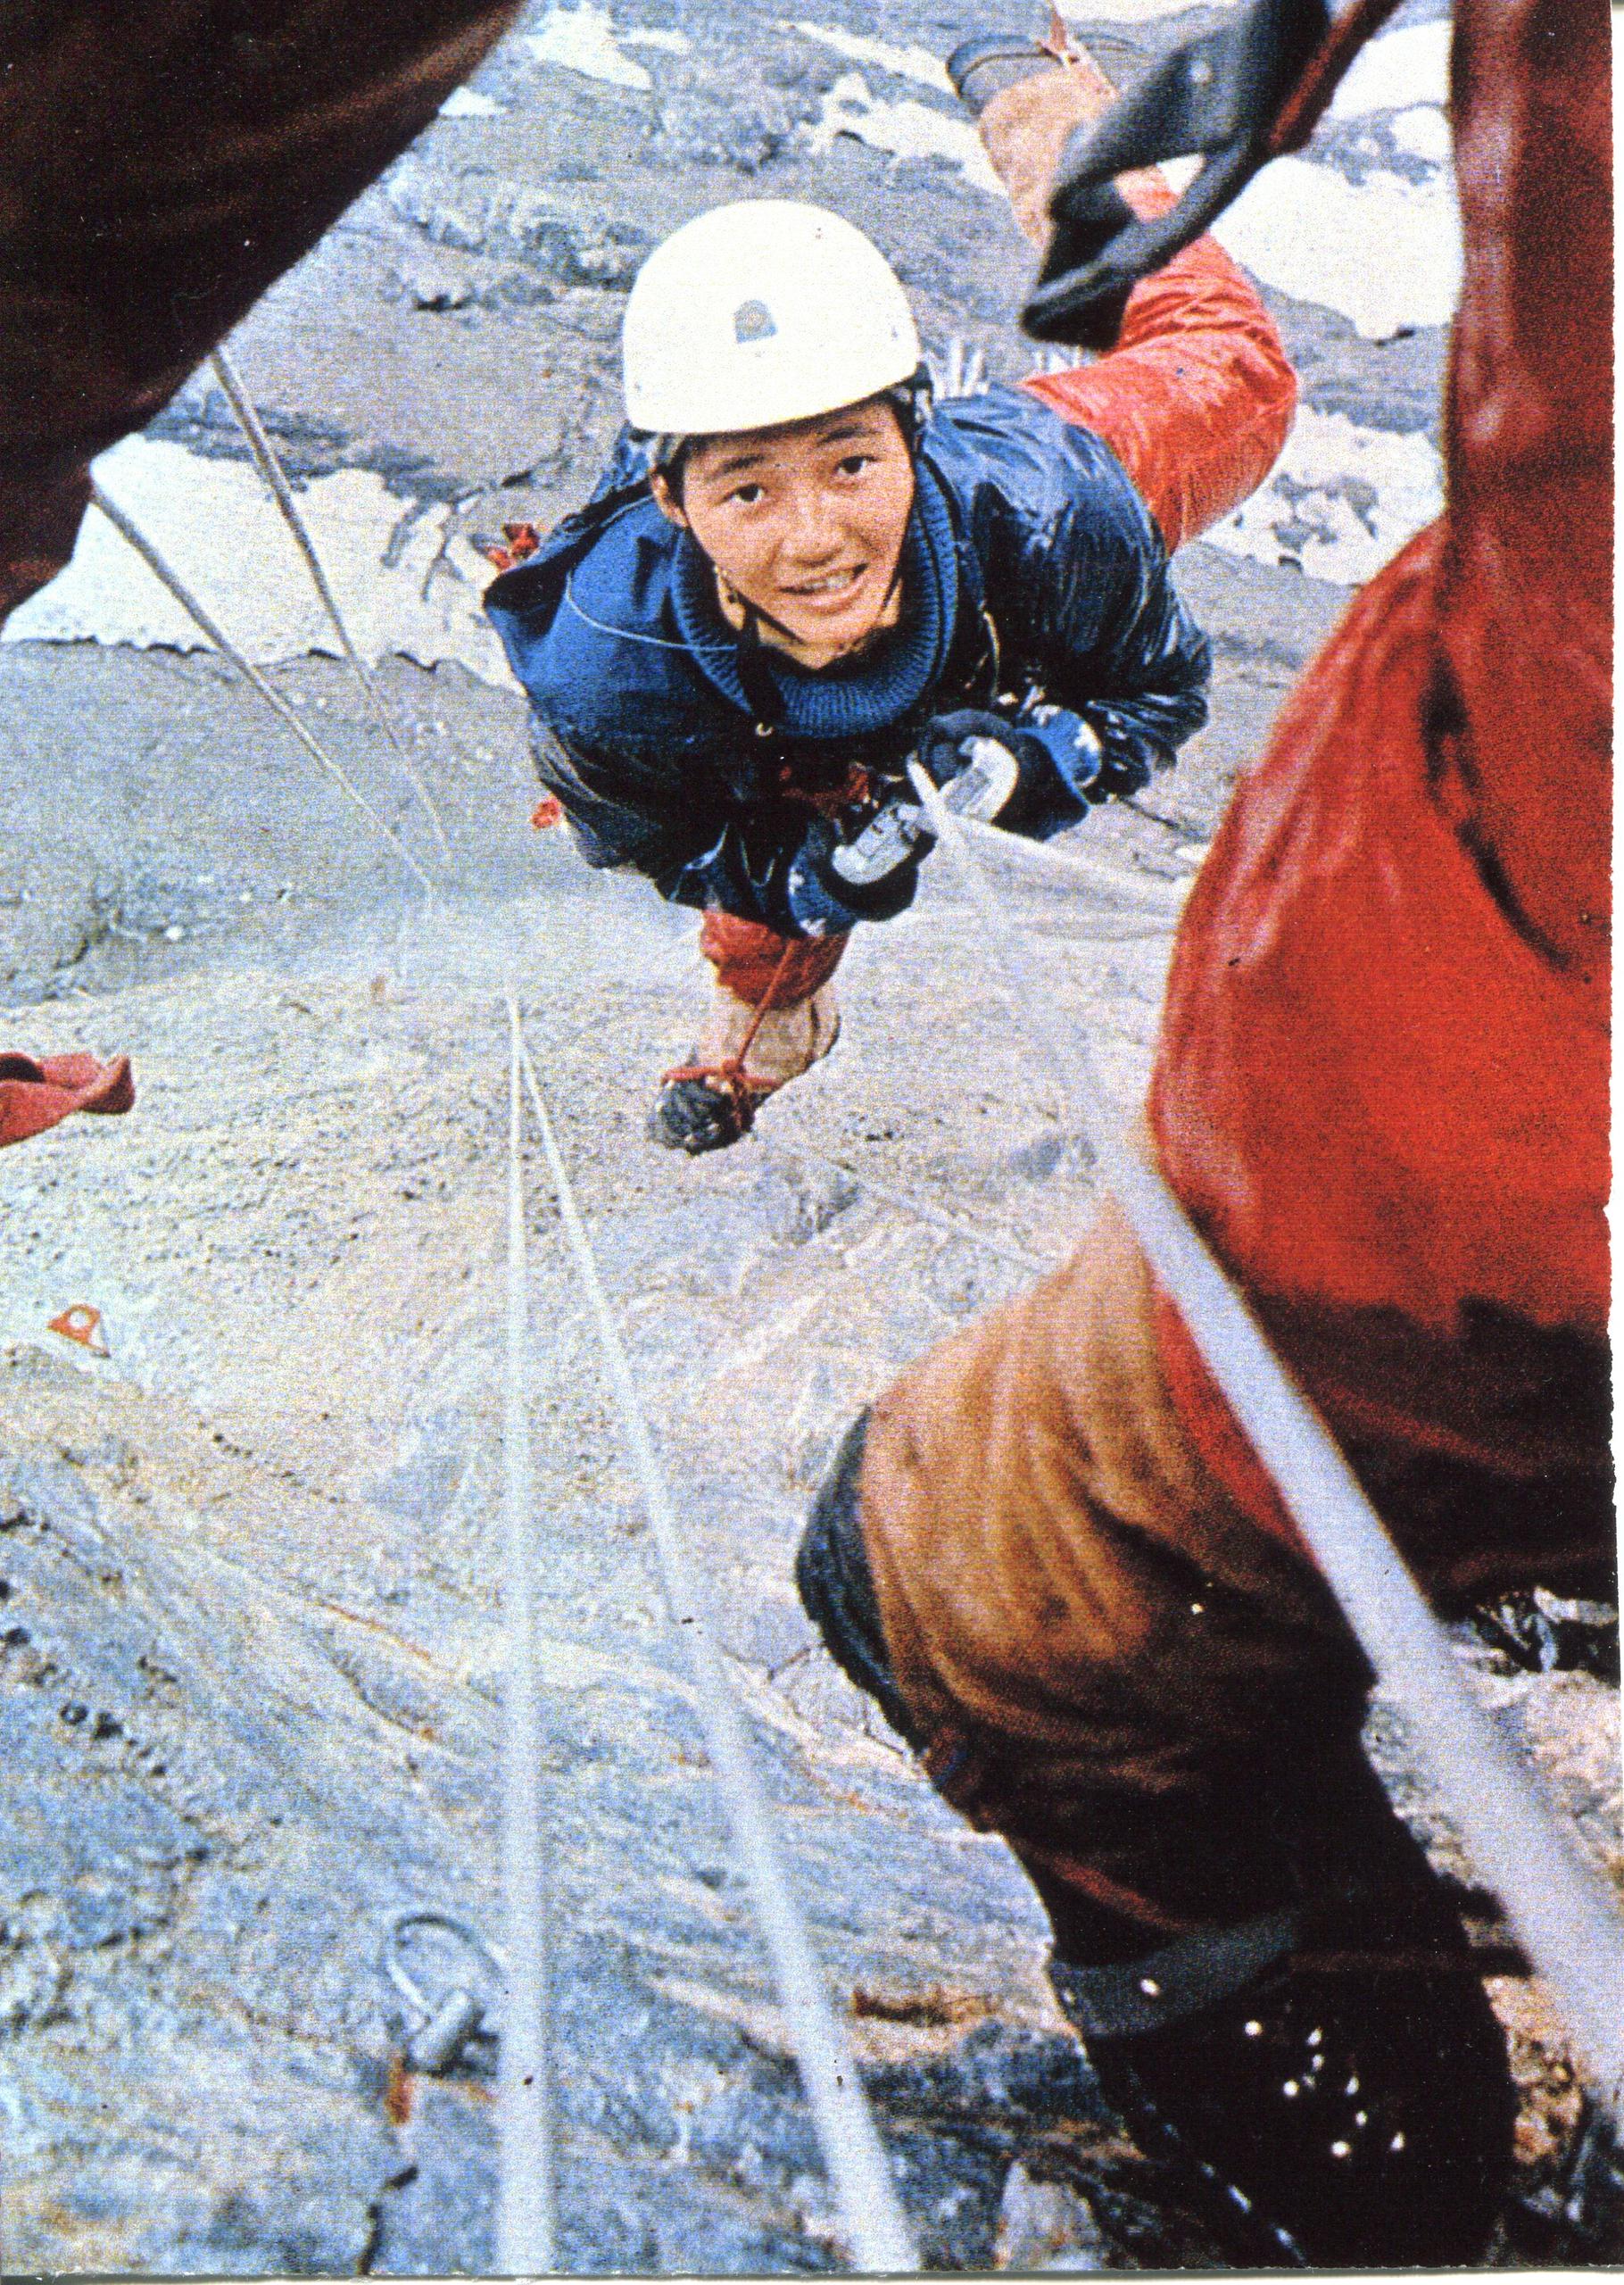 The woman climber, on a rope, looking up at the person taking the photograph